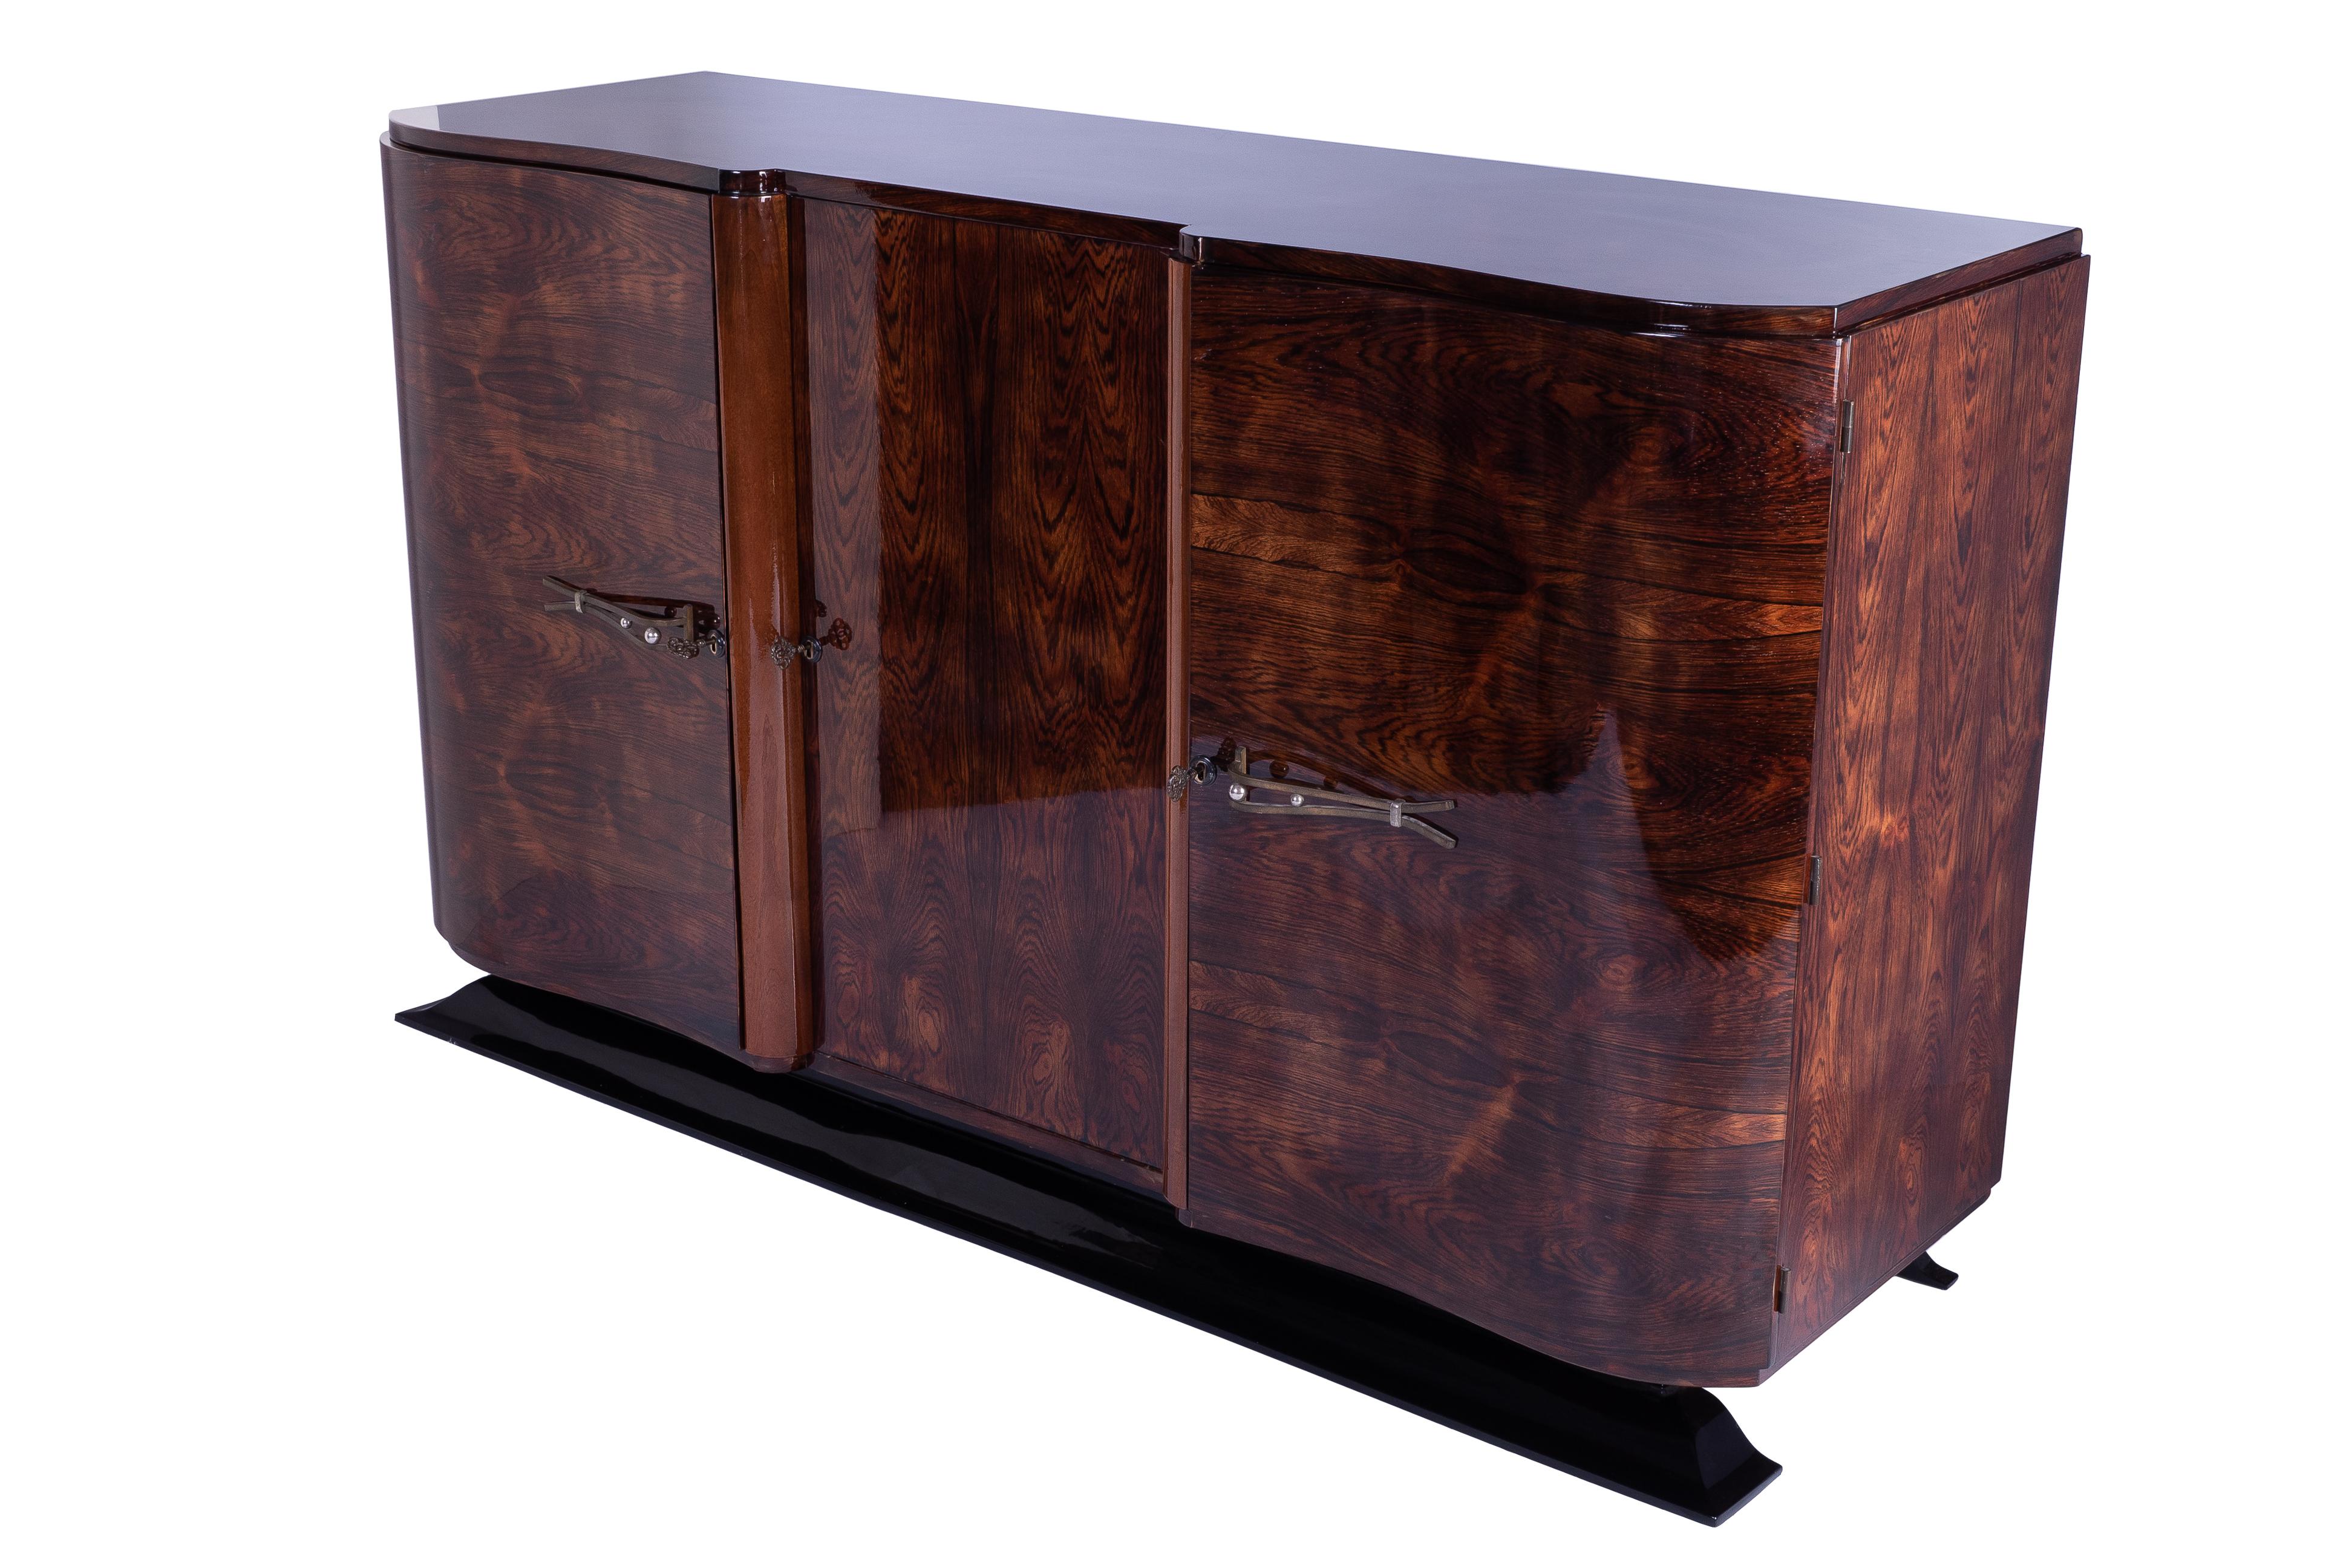 Art Deco sideboard / credenza featuring a solid mahogany frame veneered in luxurious rosewood and finished in a high gloss lacquer. The piece has two single side doors with original brass hardware. Plenty of storage. French foot stained in a darker